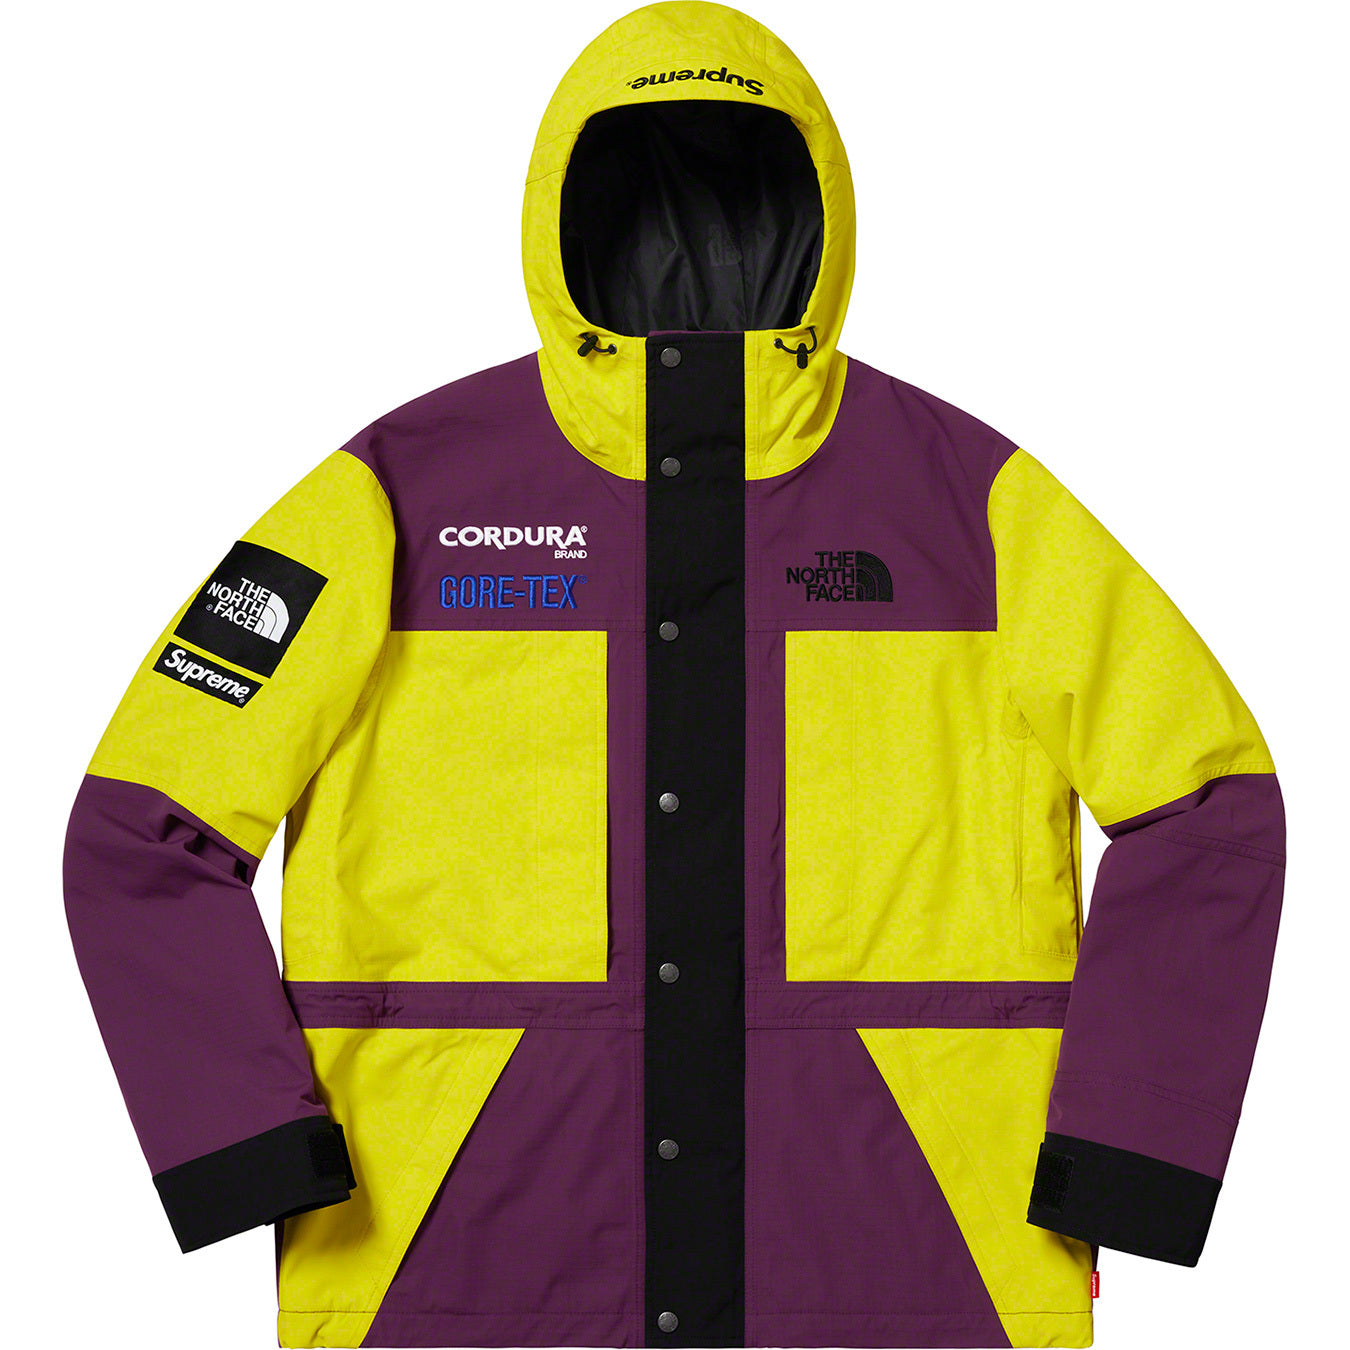 Supreme The North Face Expedition Jacket - Sulphur | Supreme